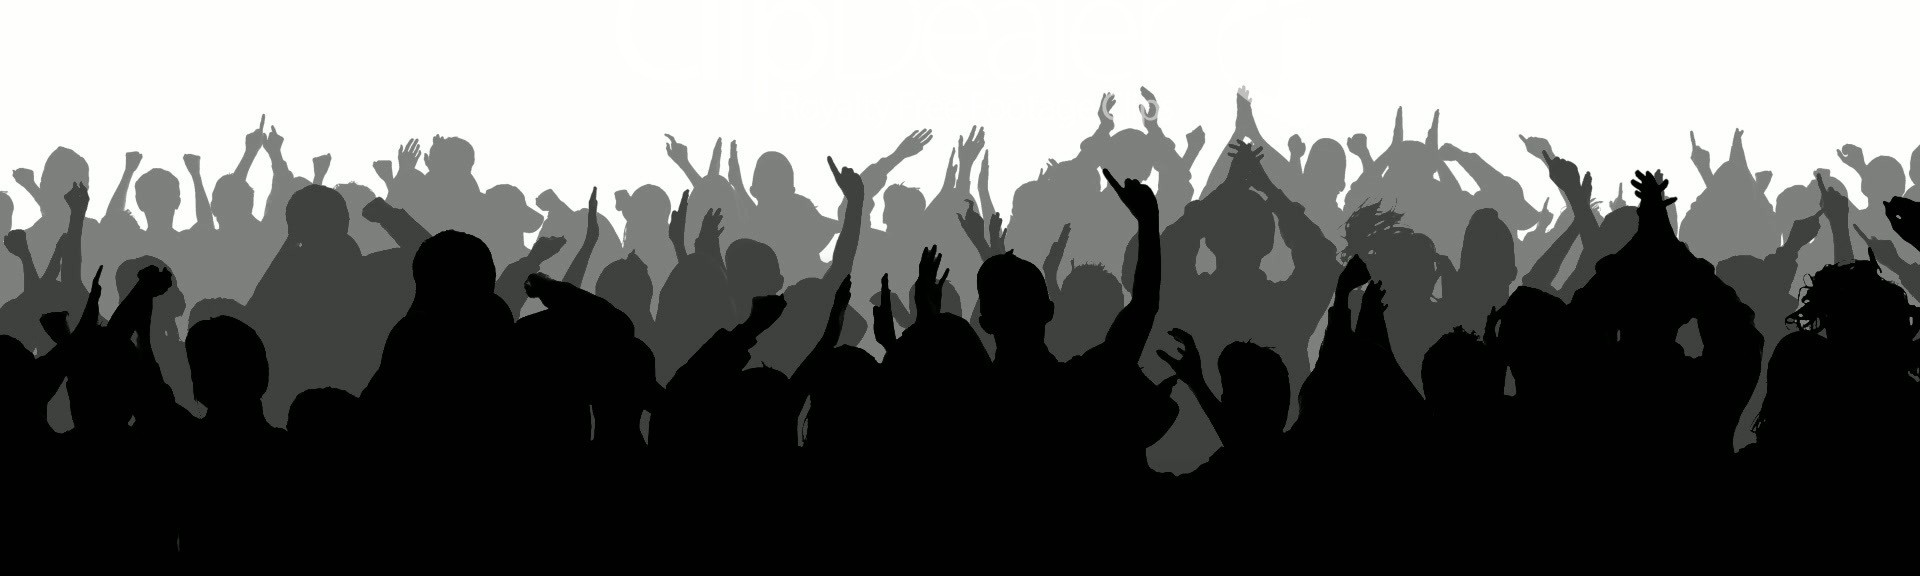 music audience clipart - photo #35